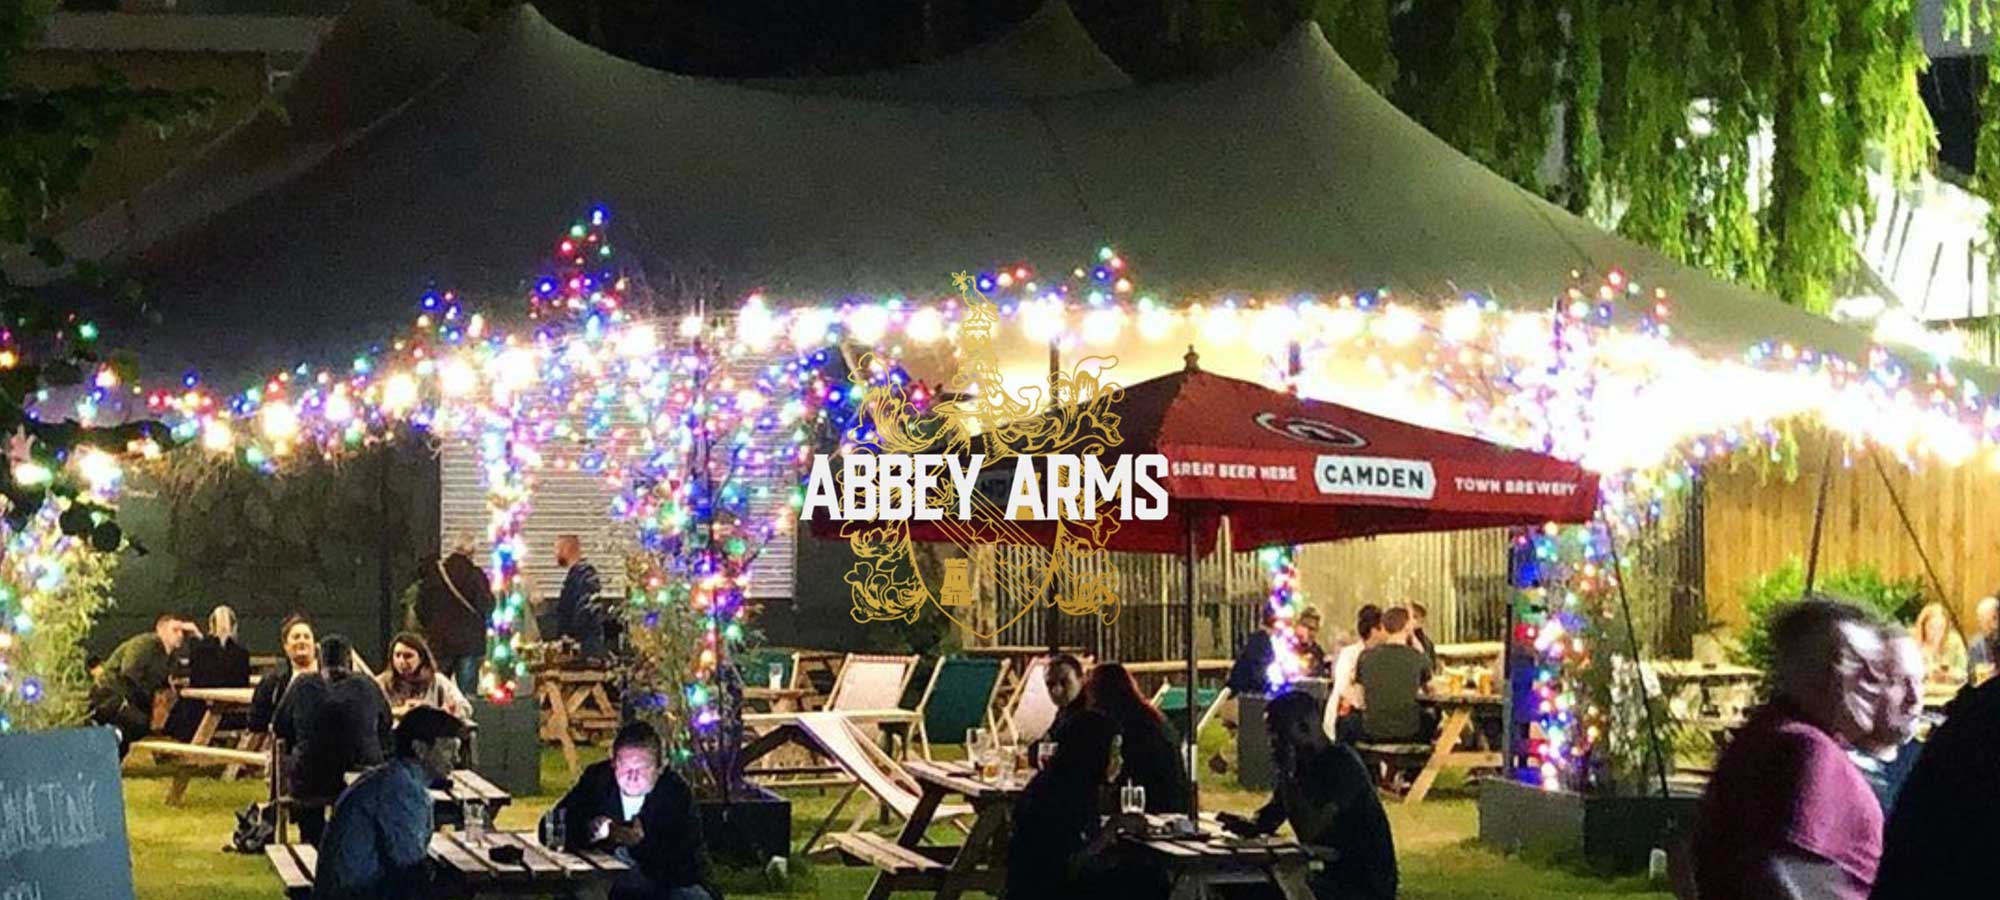 Abbey Arms